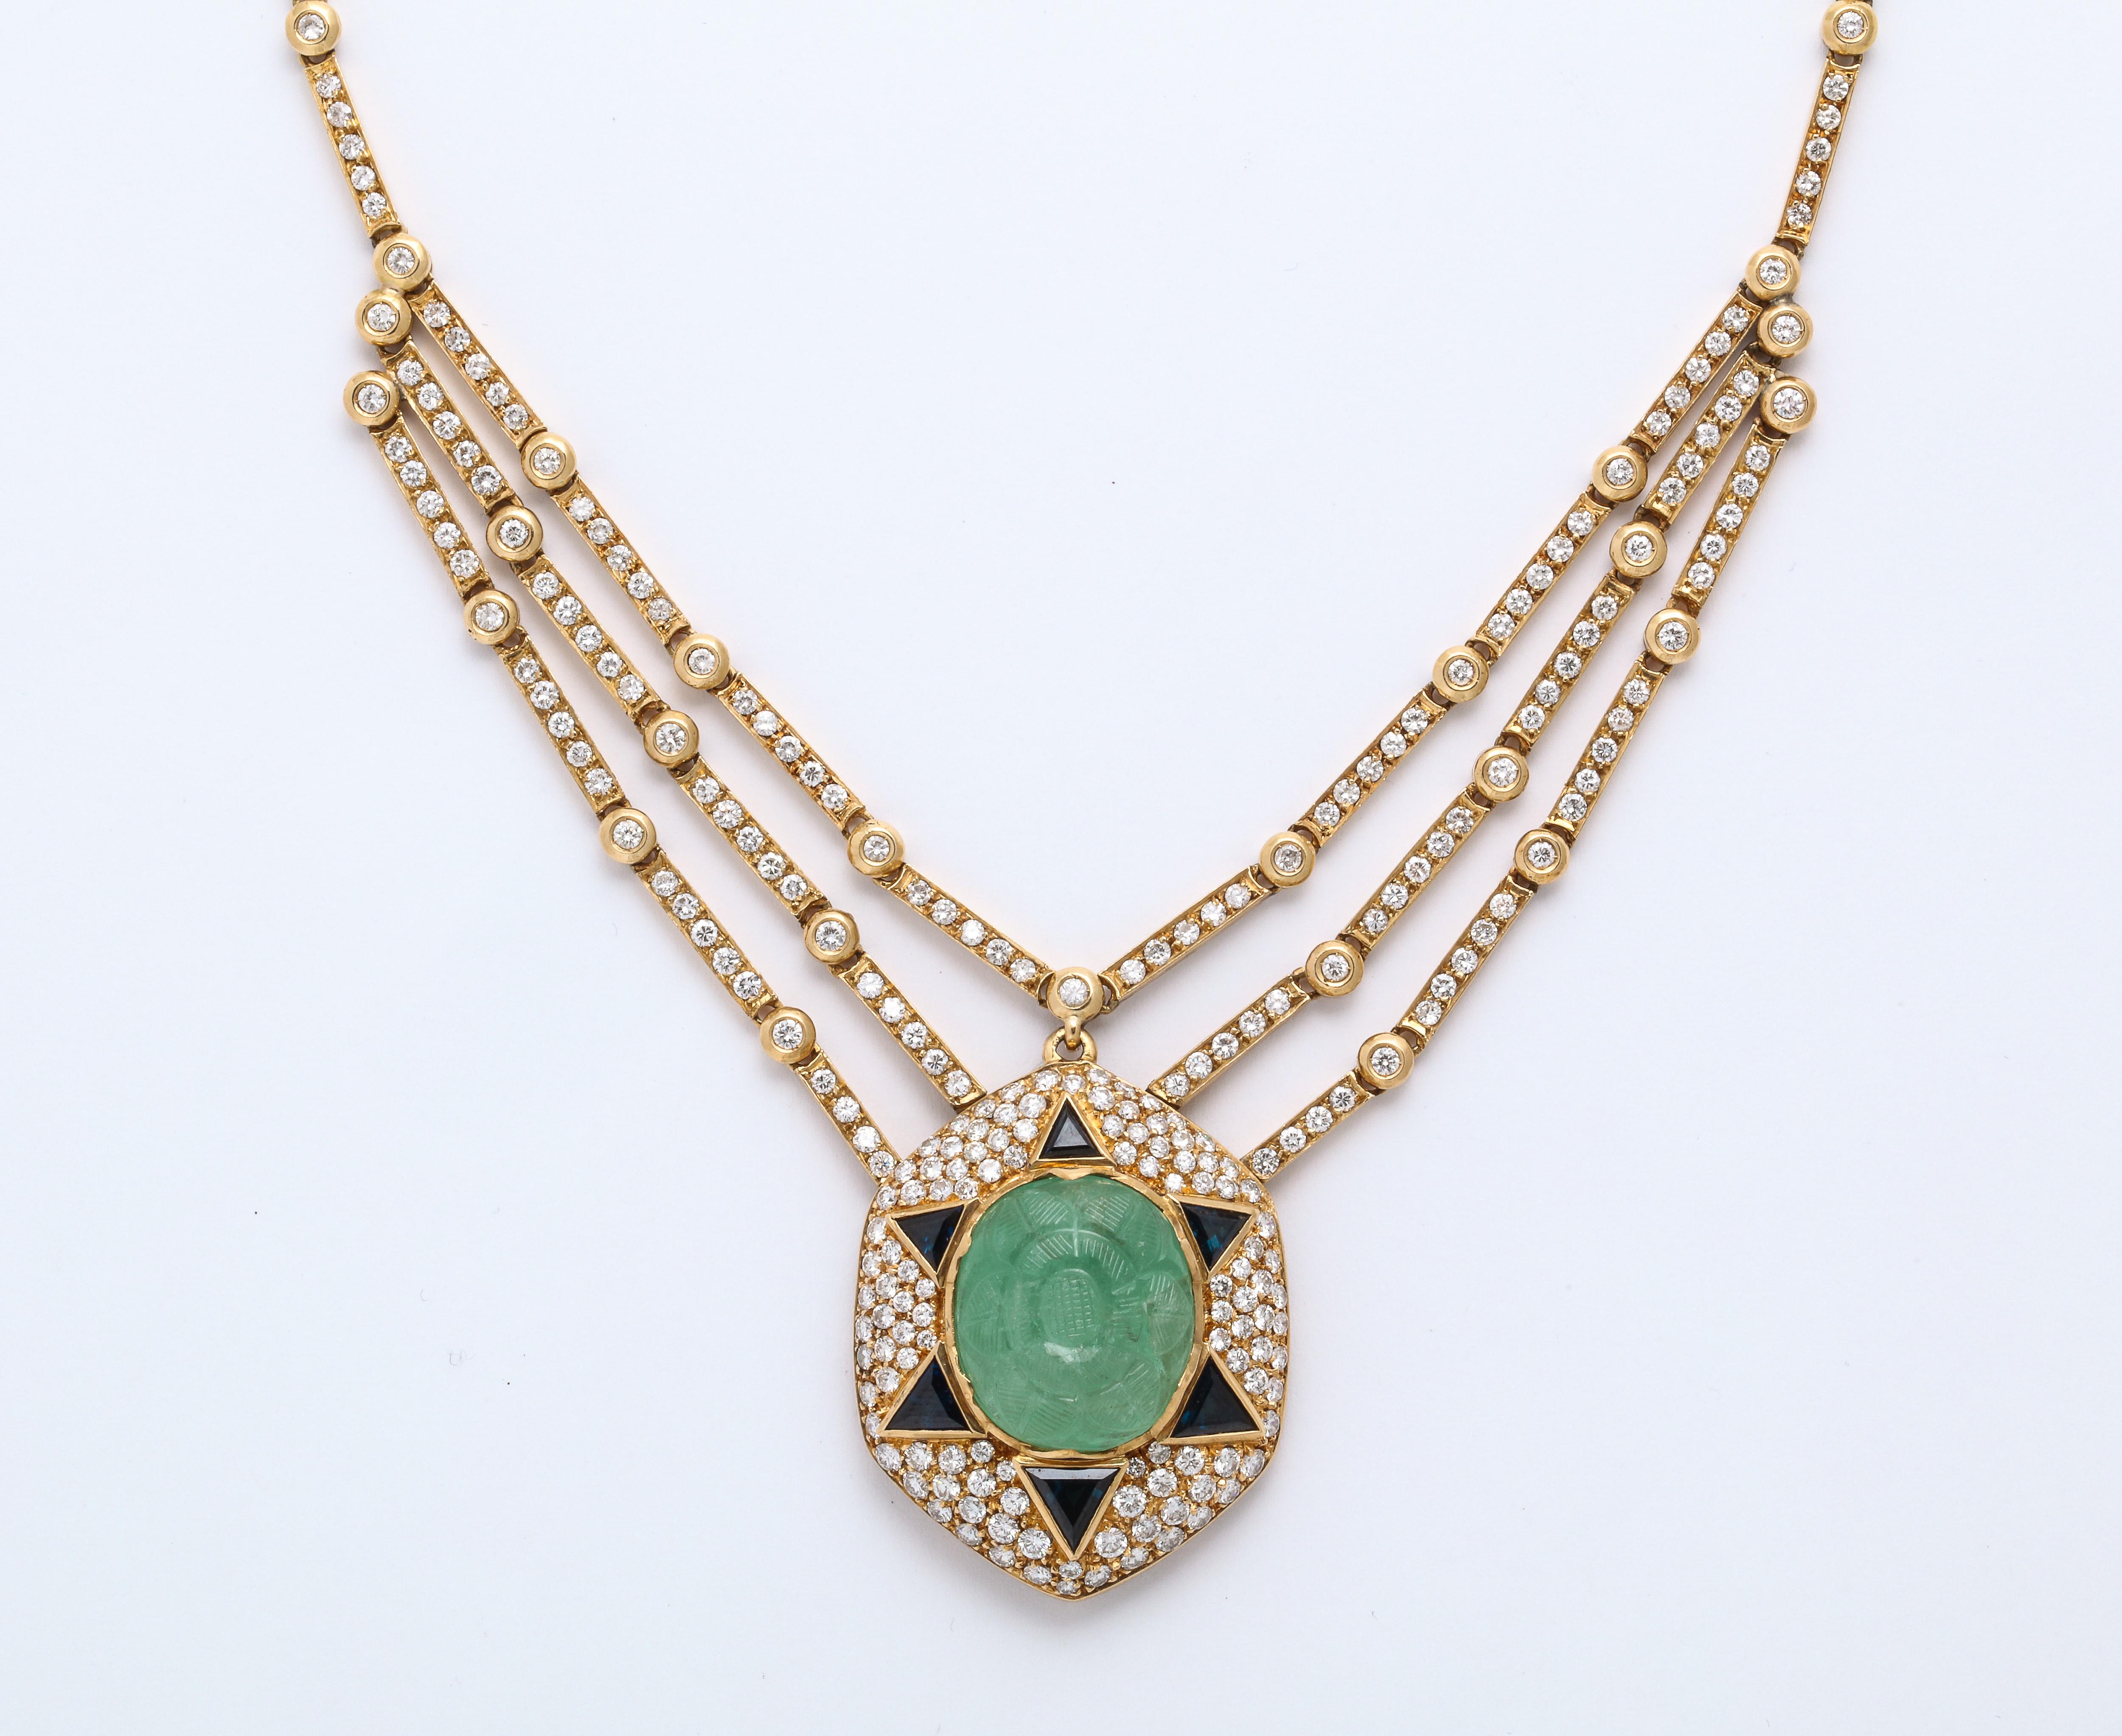 Gorgeous Art Deco style Esclavage Collier Necklace with diamonds, Carved Emerald and triangular cut sapphire center stones set in gold

Necklace is stamped 750 
Total of 374 Diamonds weighing approx. 6.5cts
6 Triangle Cut Sapphires approx. 2.5cts
1